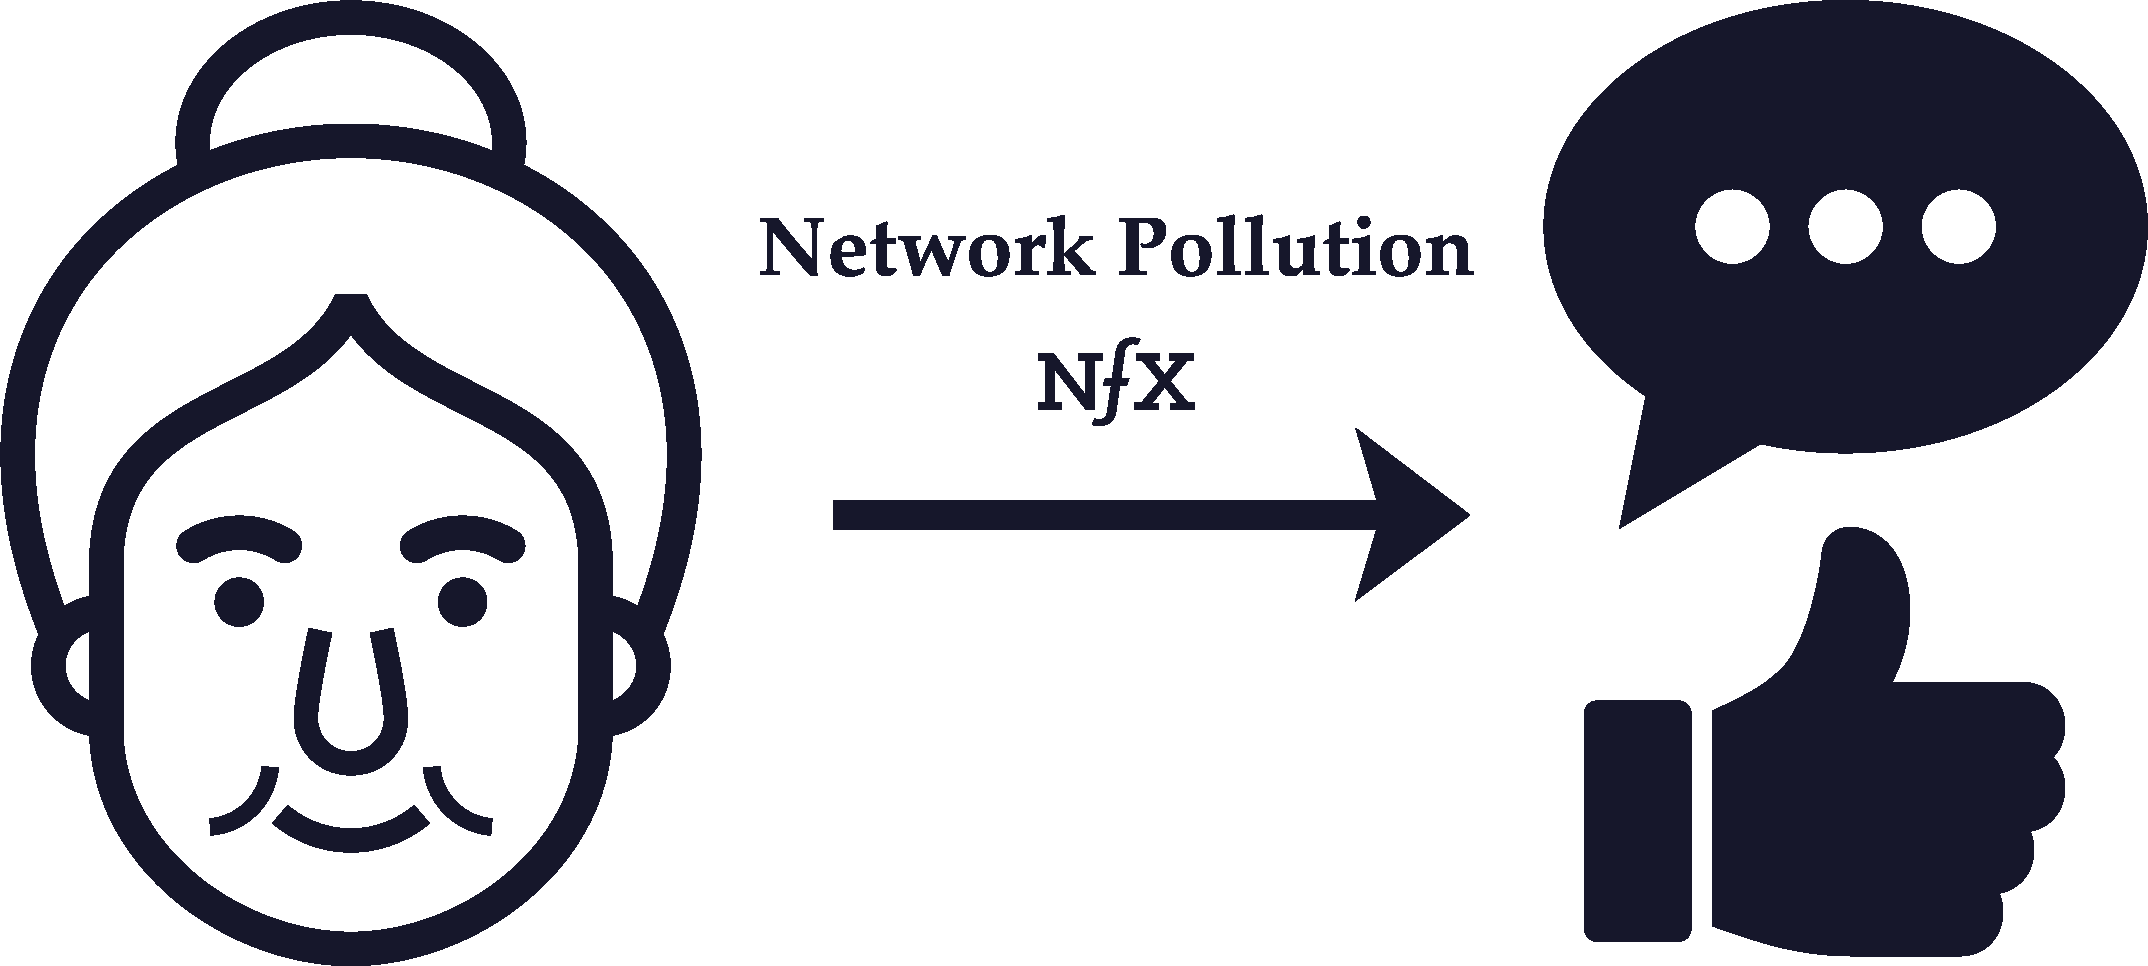 Network pollution